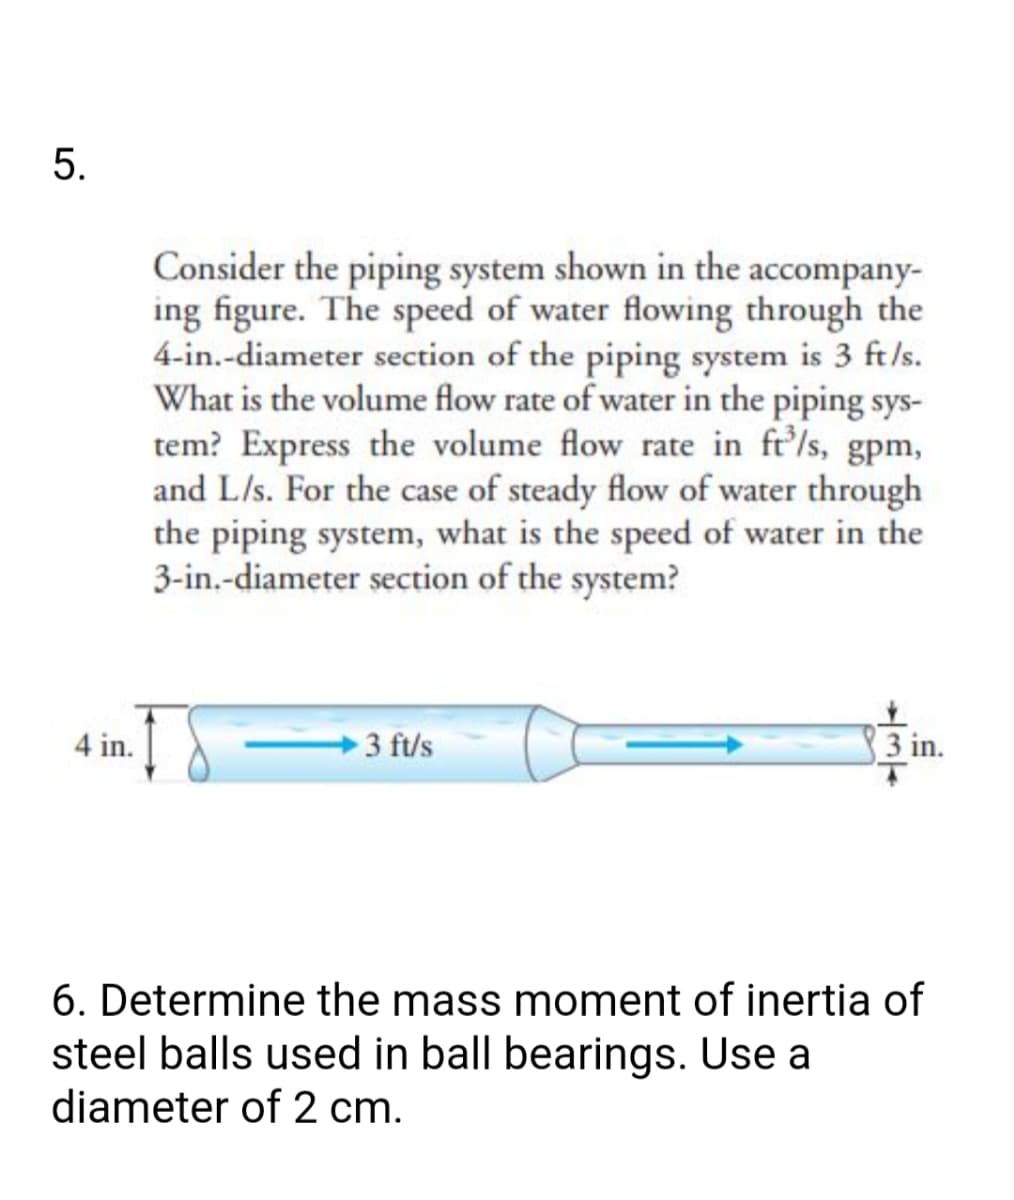 Consider the piping system shown in the accompany-
ing figure. The speed of water flowing through the
4-in.-diameter section of the piping system is 3 ft/s.
What is the volume flow rate of water in the piping sys-
tem? Express the volume flow rate in ft'ls, gpm,
and L/s. For the case of steady flow of water through
the piping system, what is the speed of water in the
3-in.-diameter section of the system?
4 in.
3 ft/s
3 in.
6. Determine the mass moment of inertia of
steel balls used in ball bearings. Use a
diameter of 2 cm.
5.
